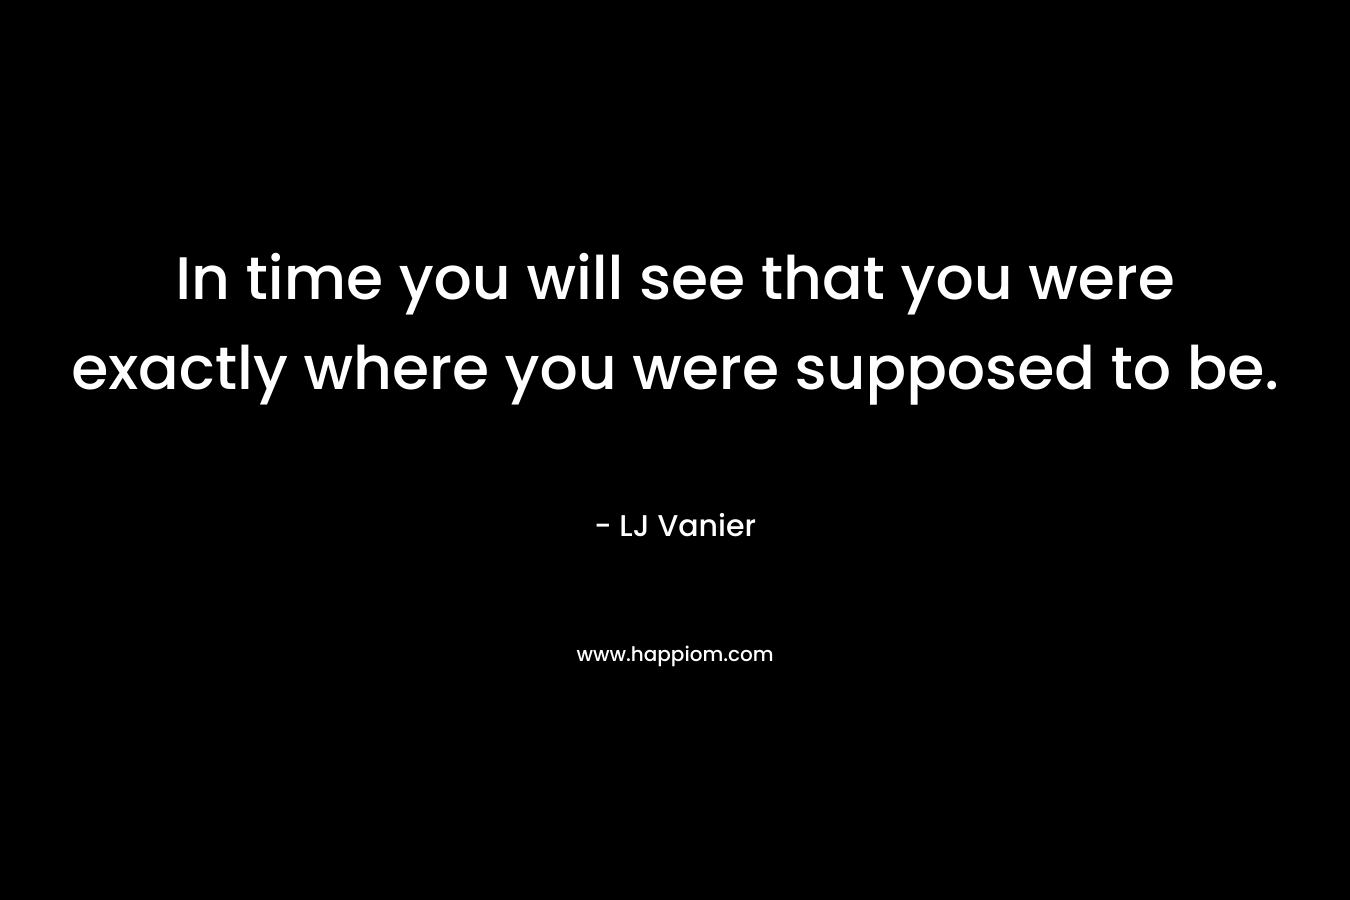 In time you will see that you were exactly where you were supposed to be. – LJ Vanier